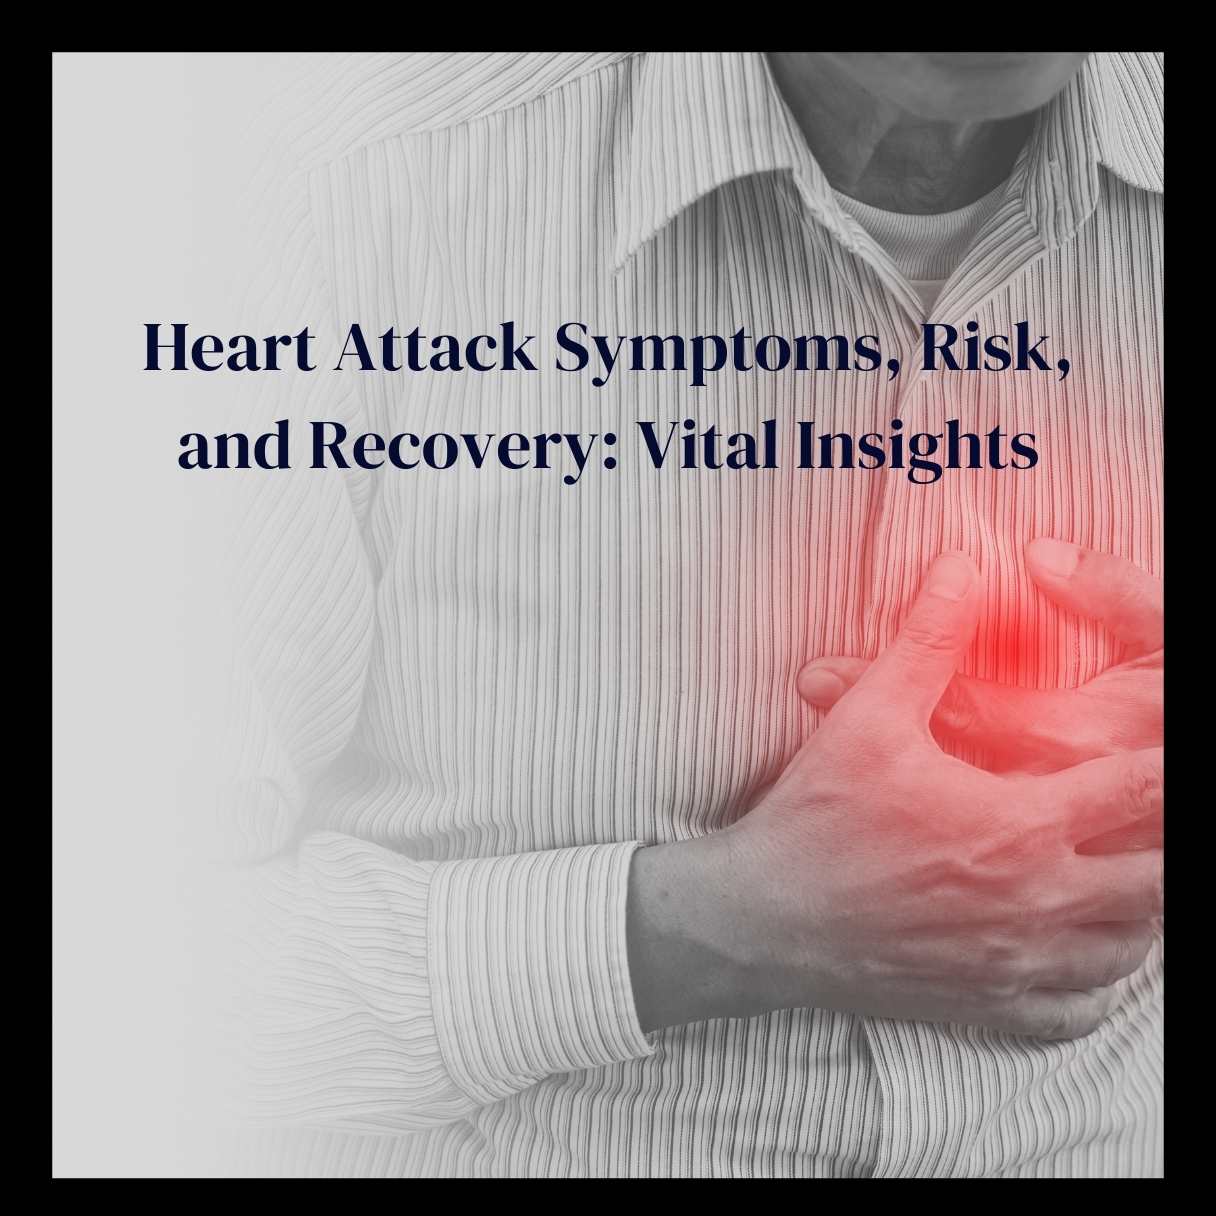 Heart Attack Symptoms, Risk, and Recovery Vital Insights_tipsforfits.com